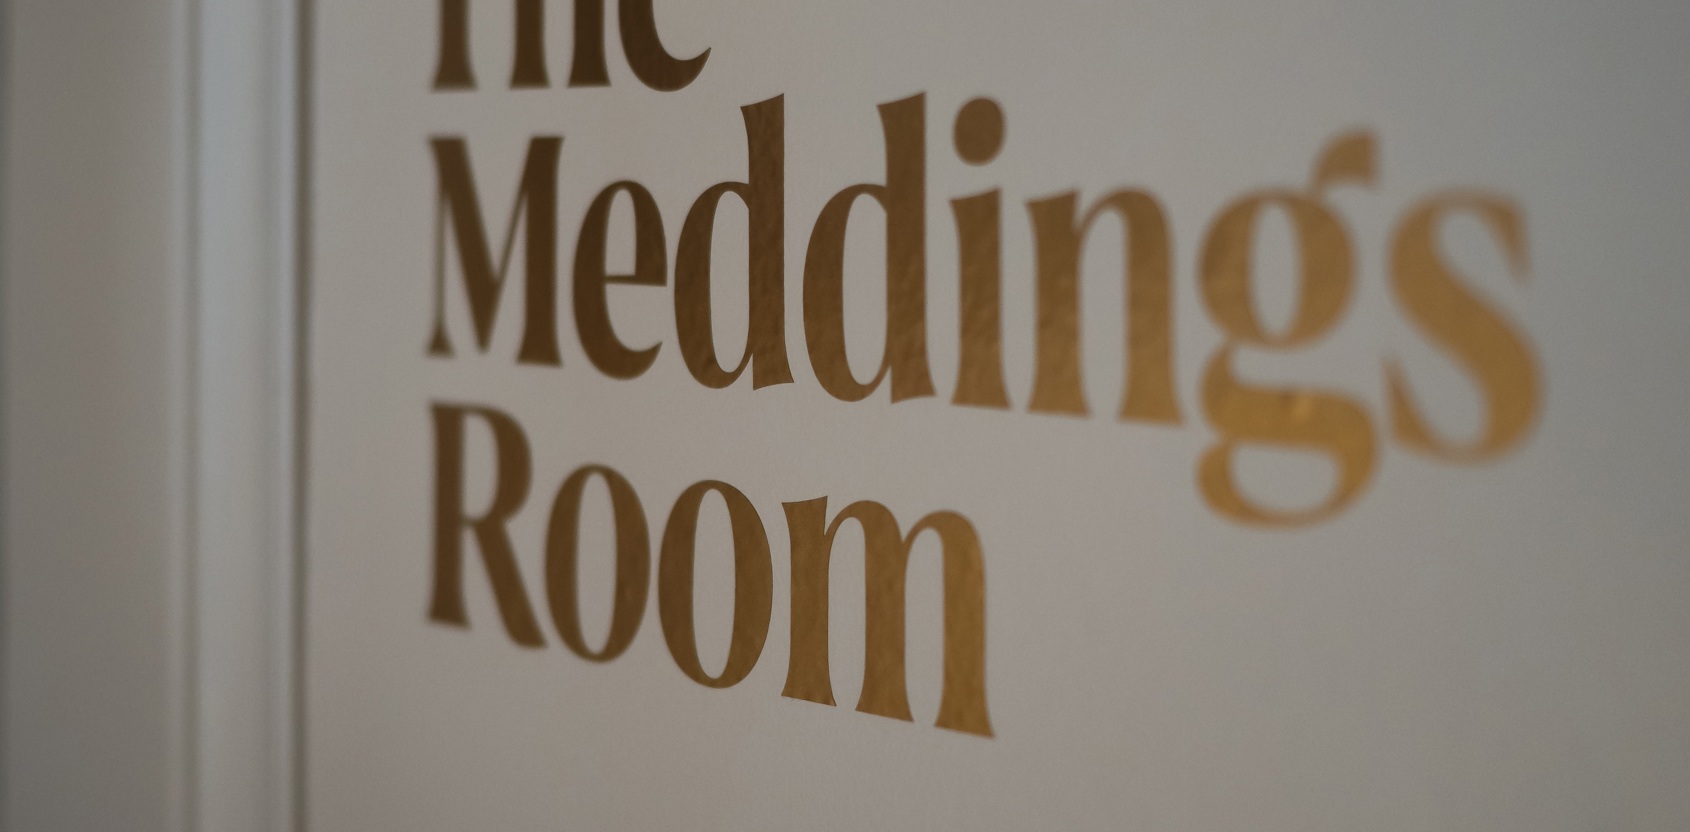 1805 Rooms gold signage